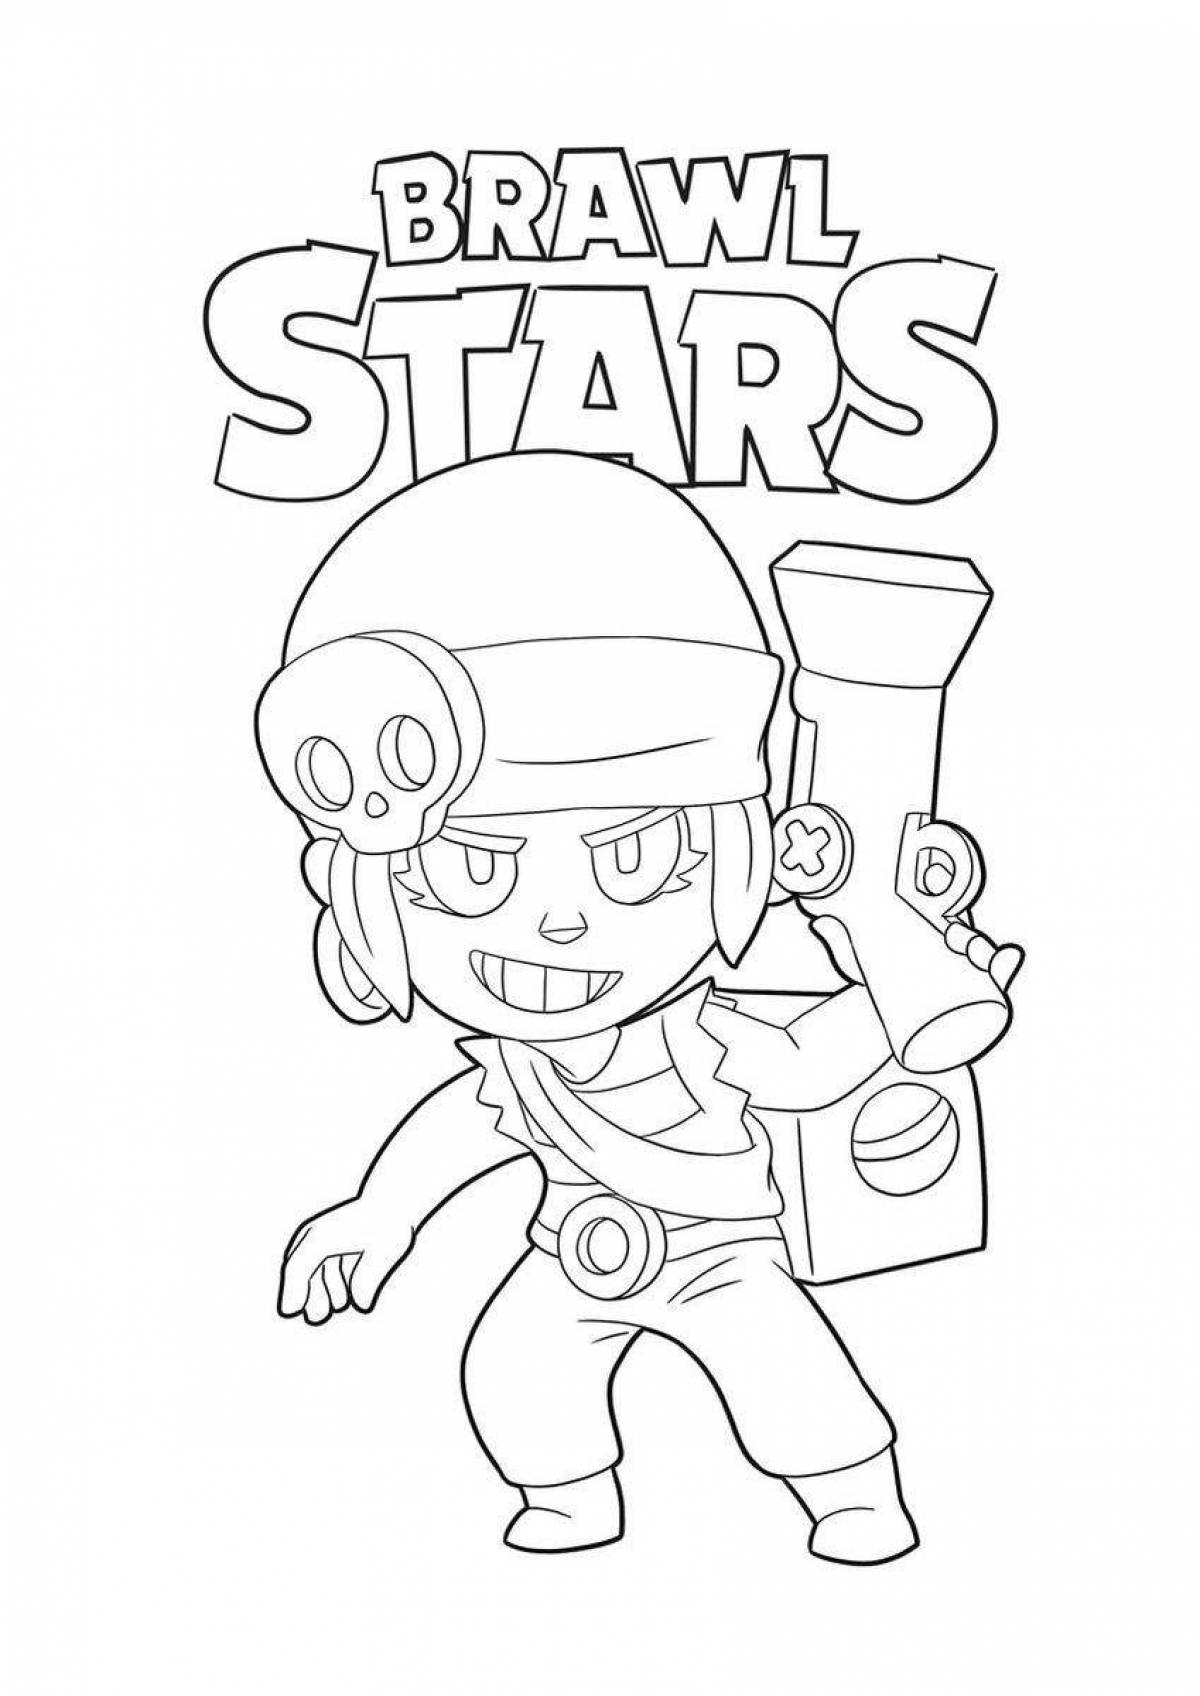 Sparkling stars coloring book